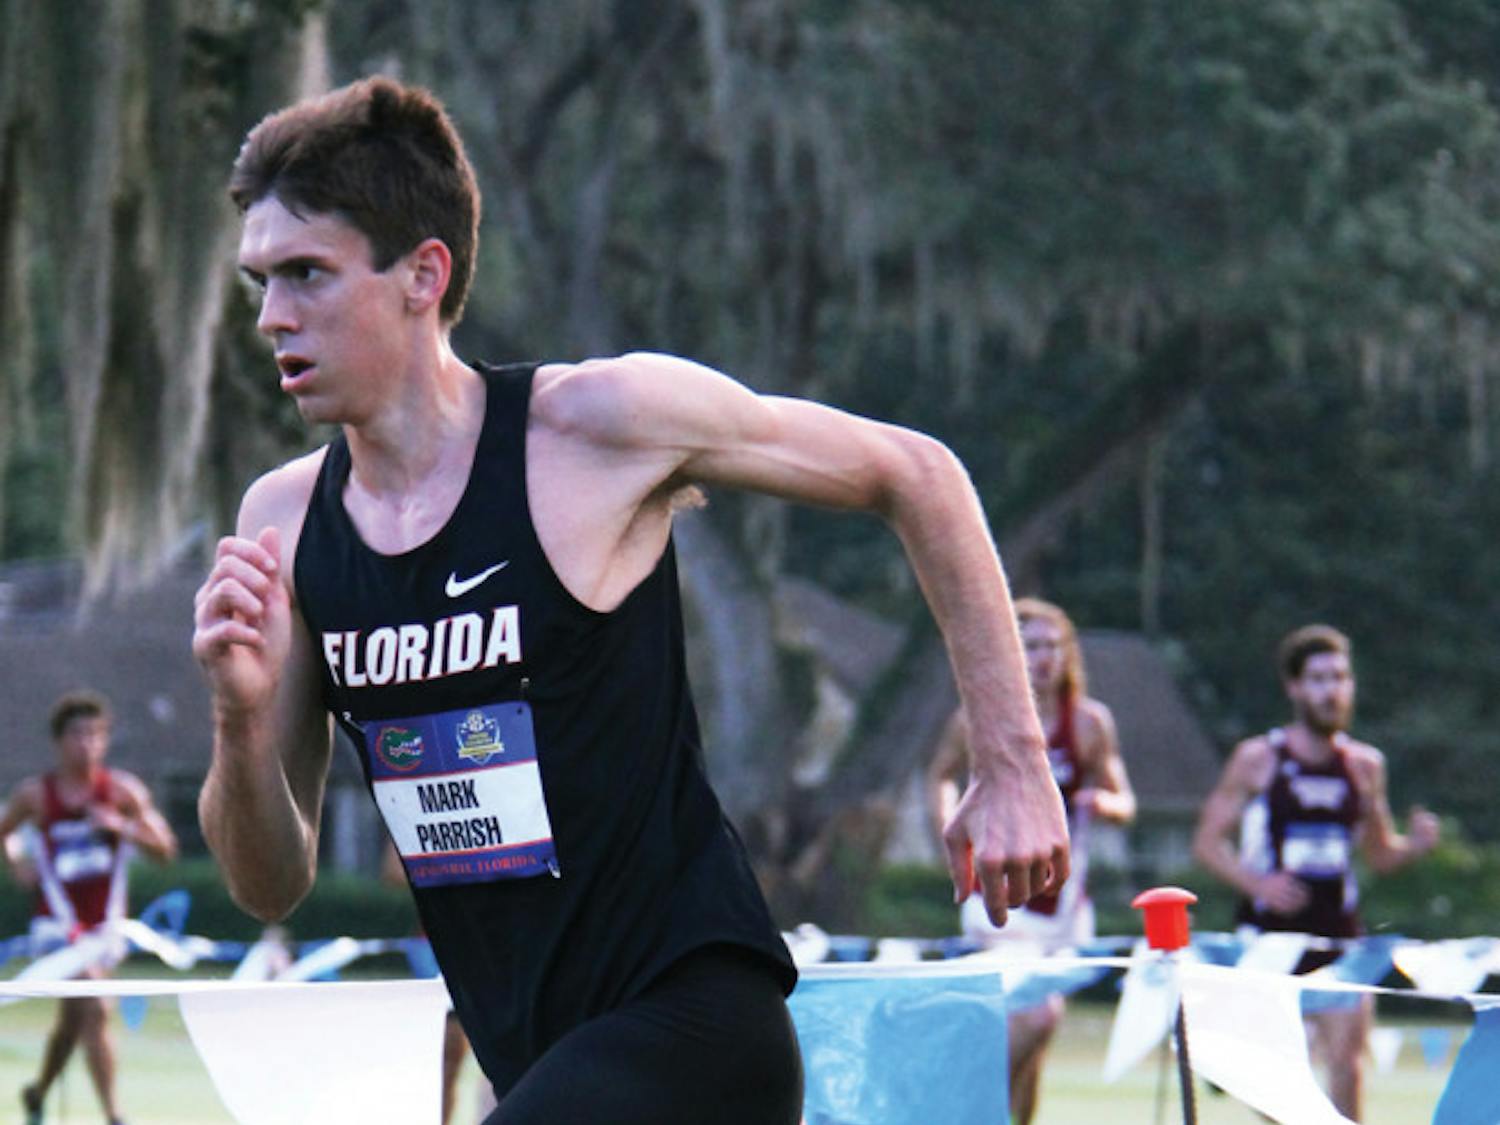 Mark Parrish runs in the Southeastern Conference Championship on Nov. 1, 2013 at the Mark Bostick Golf Course in Gainesville.